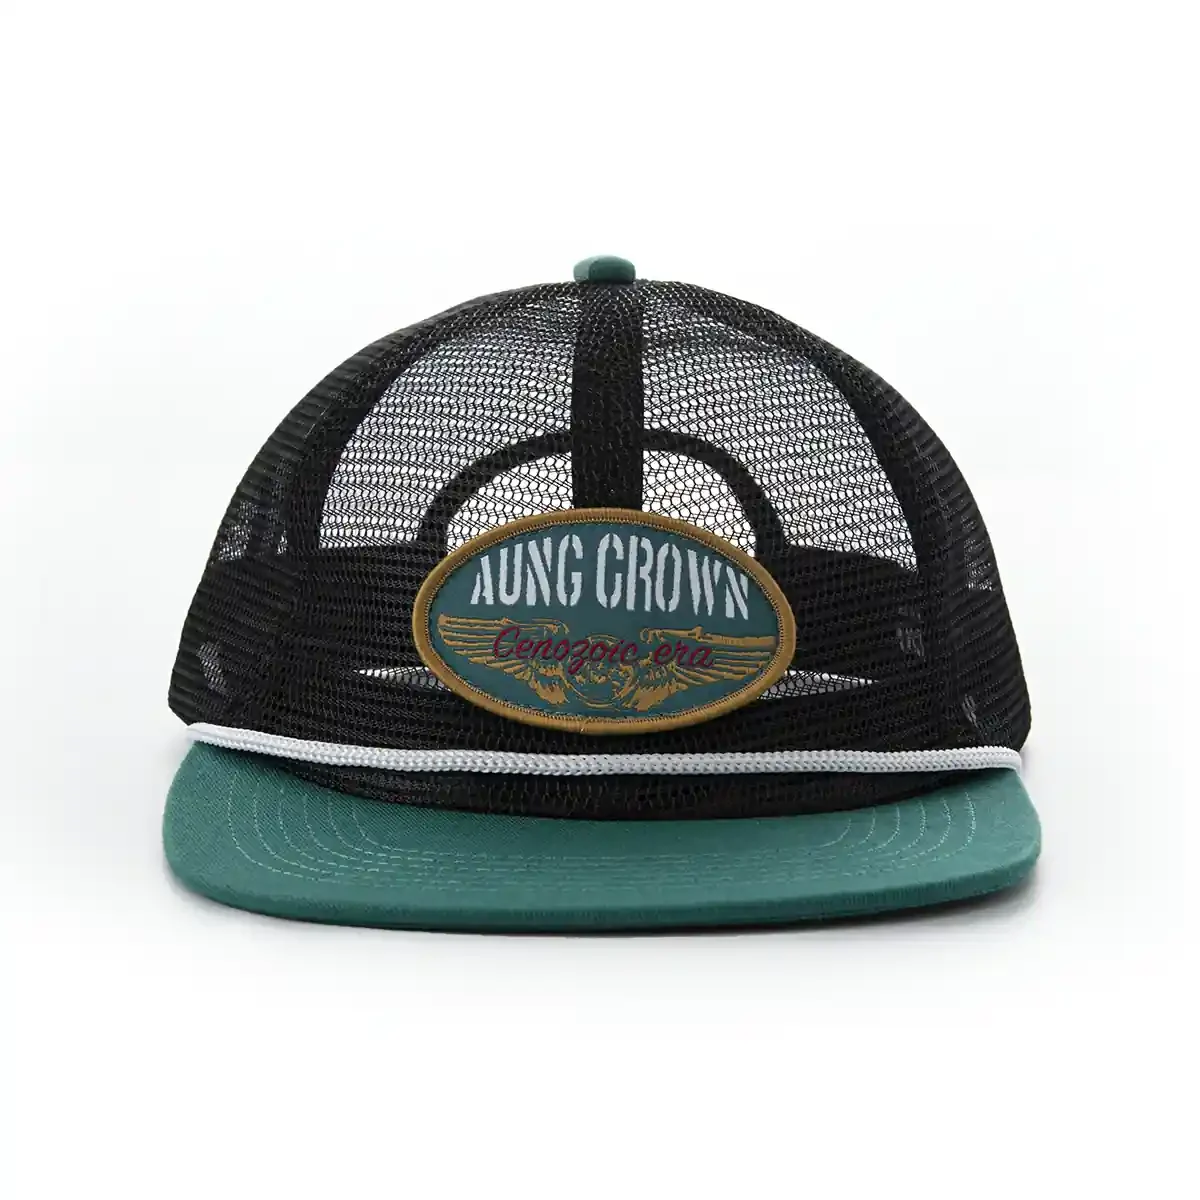 Aung-Crown-unisex-stylish-trucker-hat-for-outdoors-SFA-210407-1